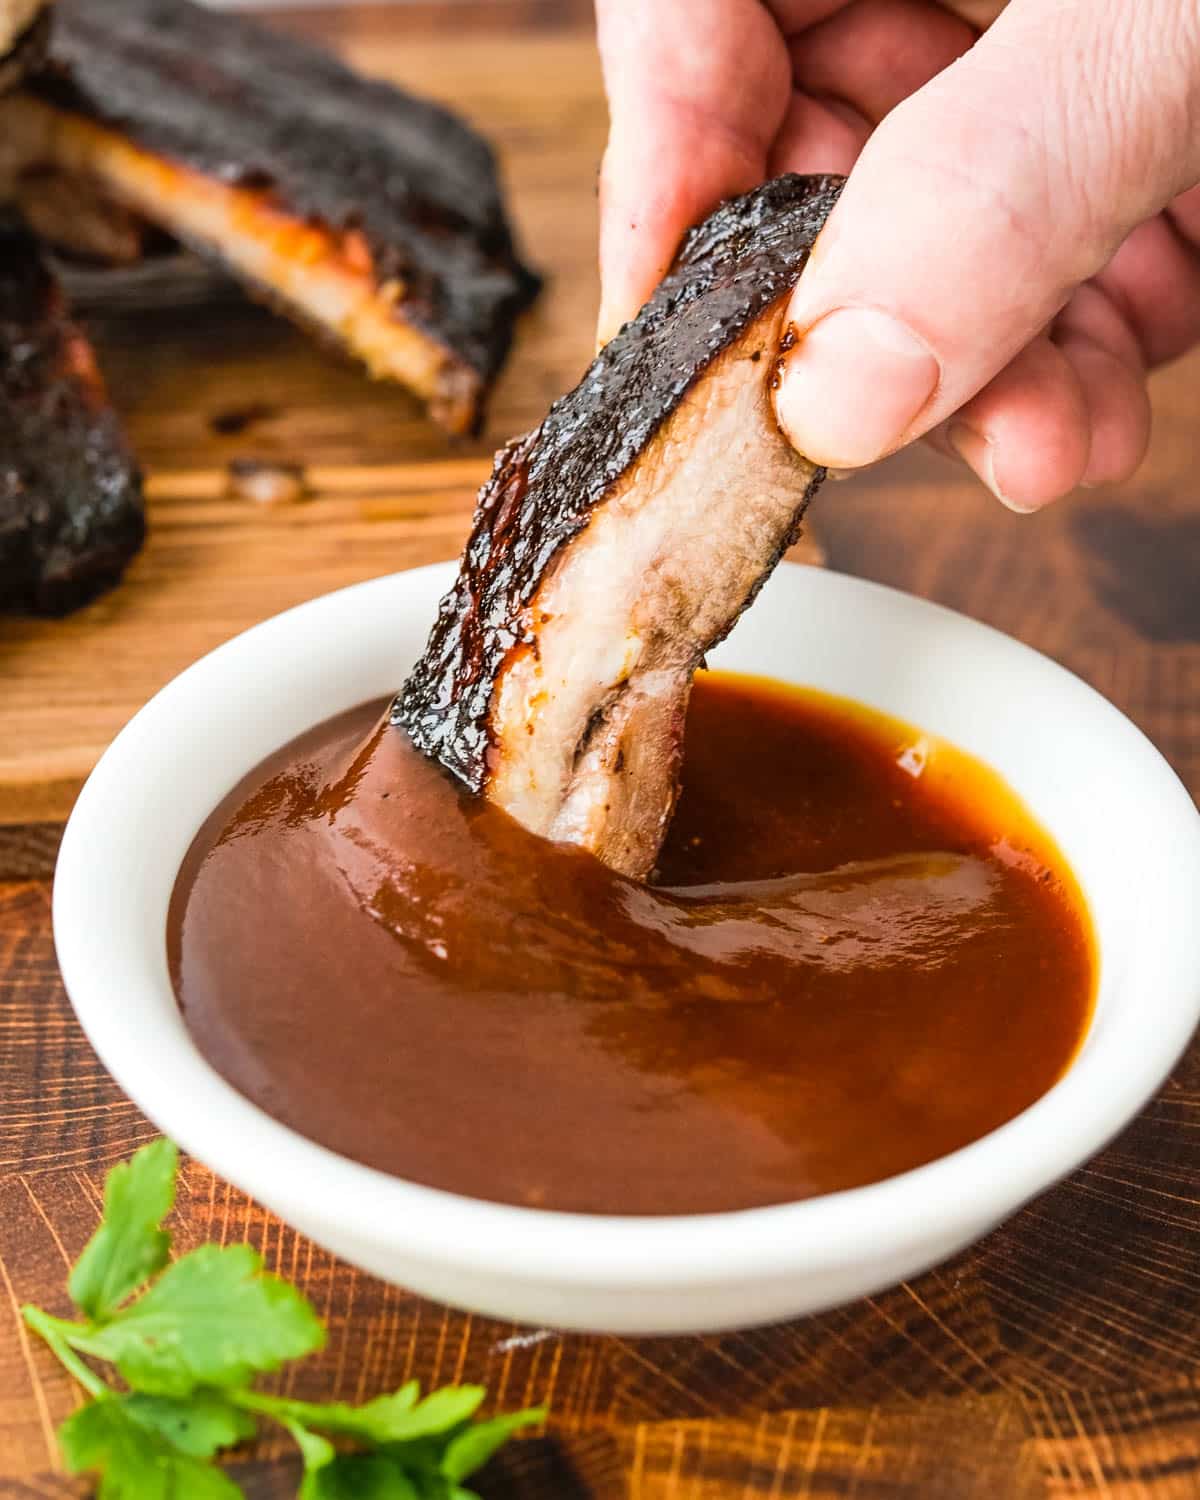 Dipping a rib into bbq sauce.